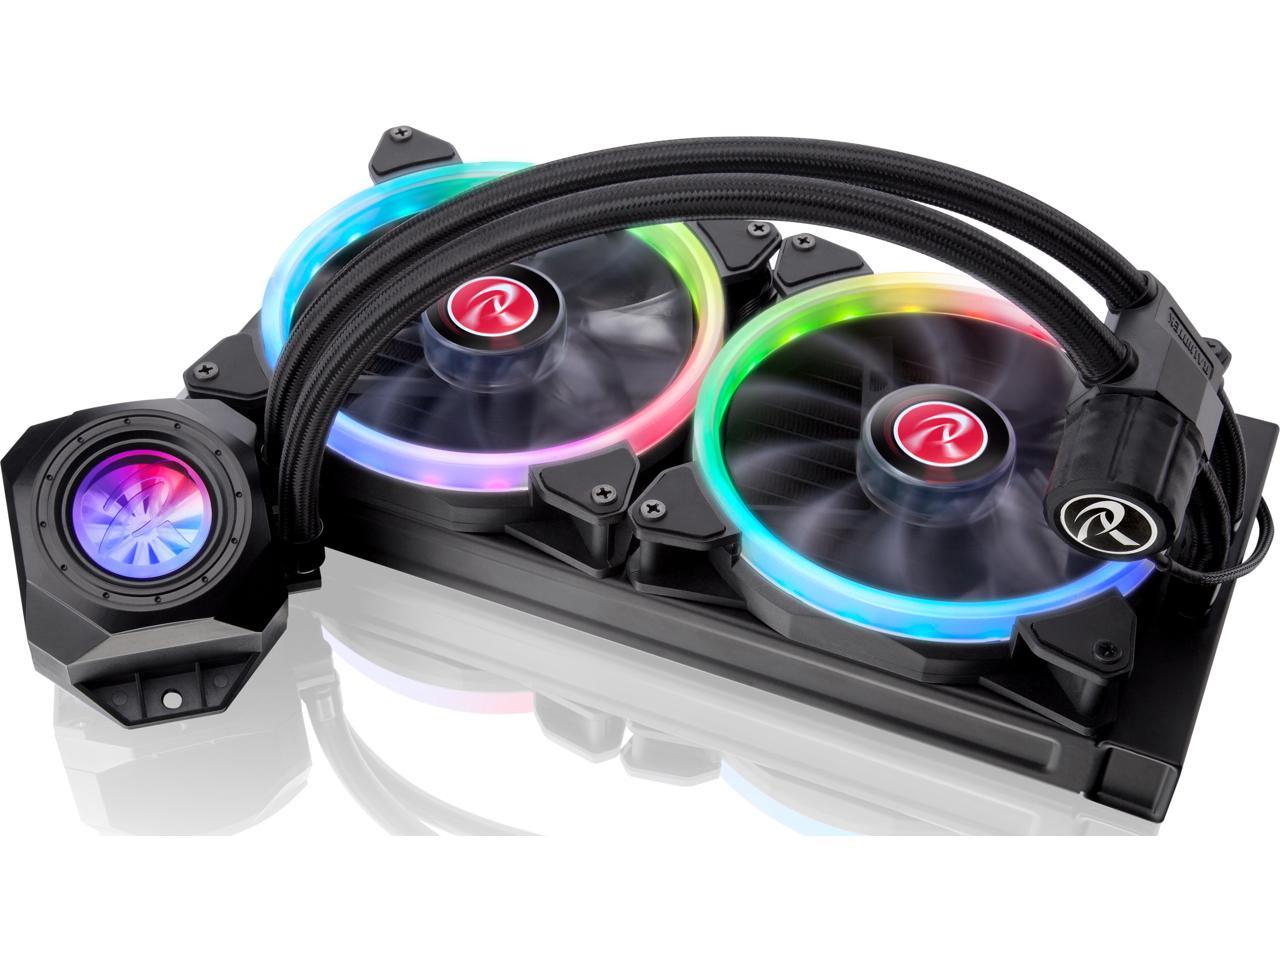 RAIJINTEK ORCUS 280 RBW, an AIO Water cooler for CPU, with 2pcs 